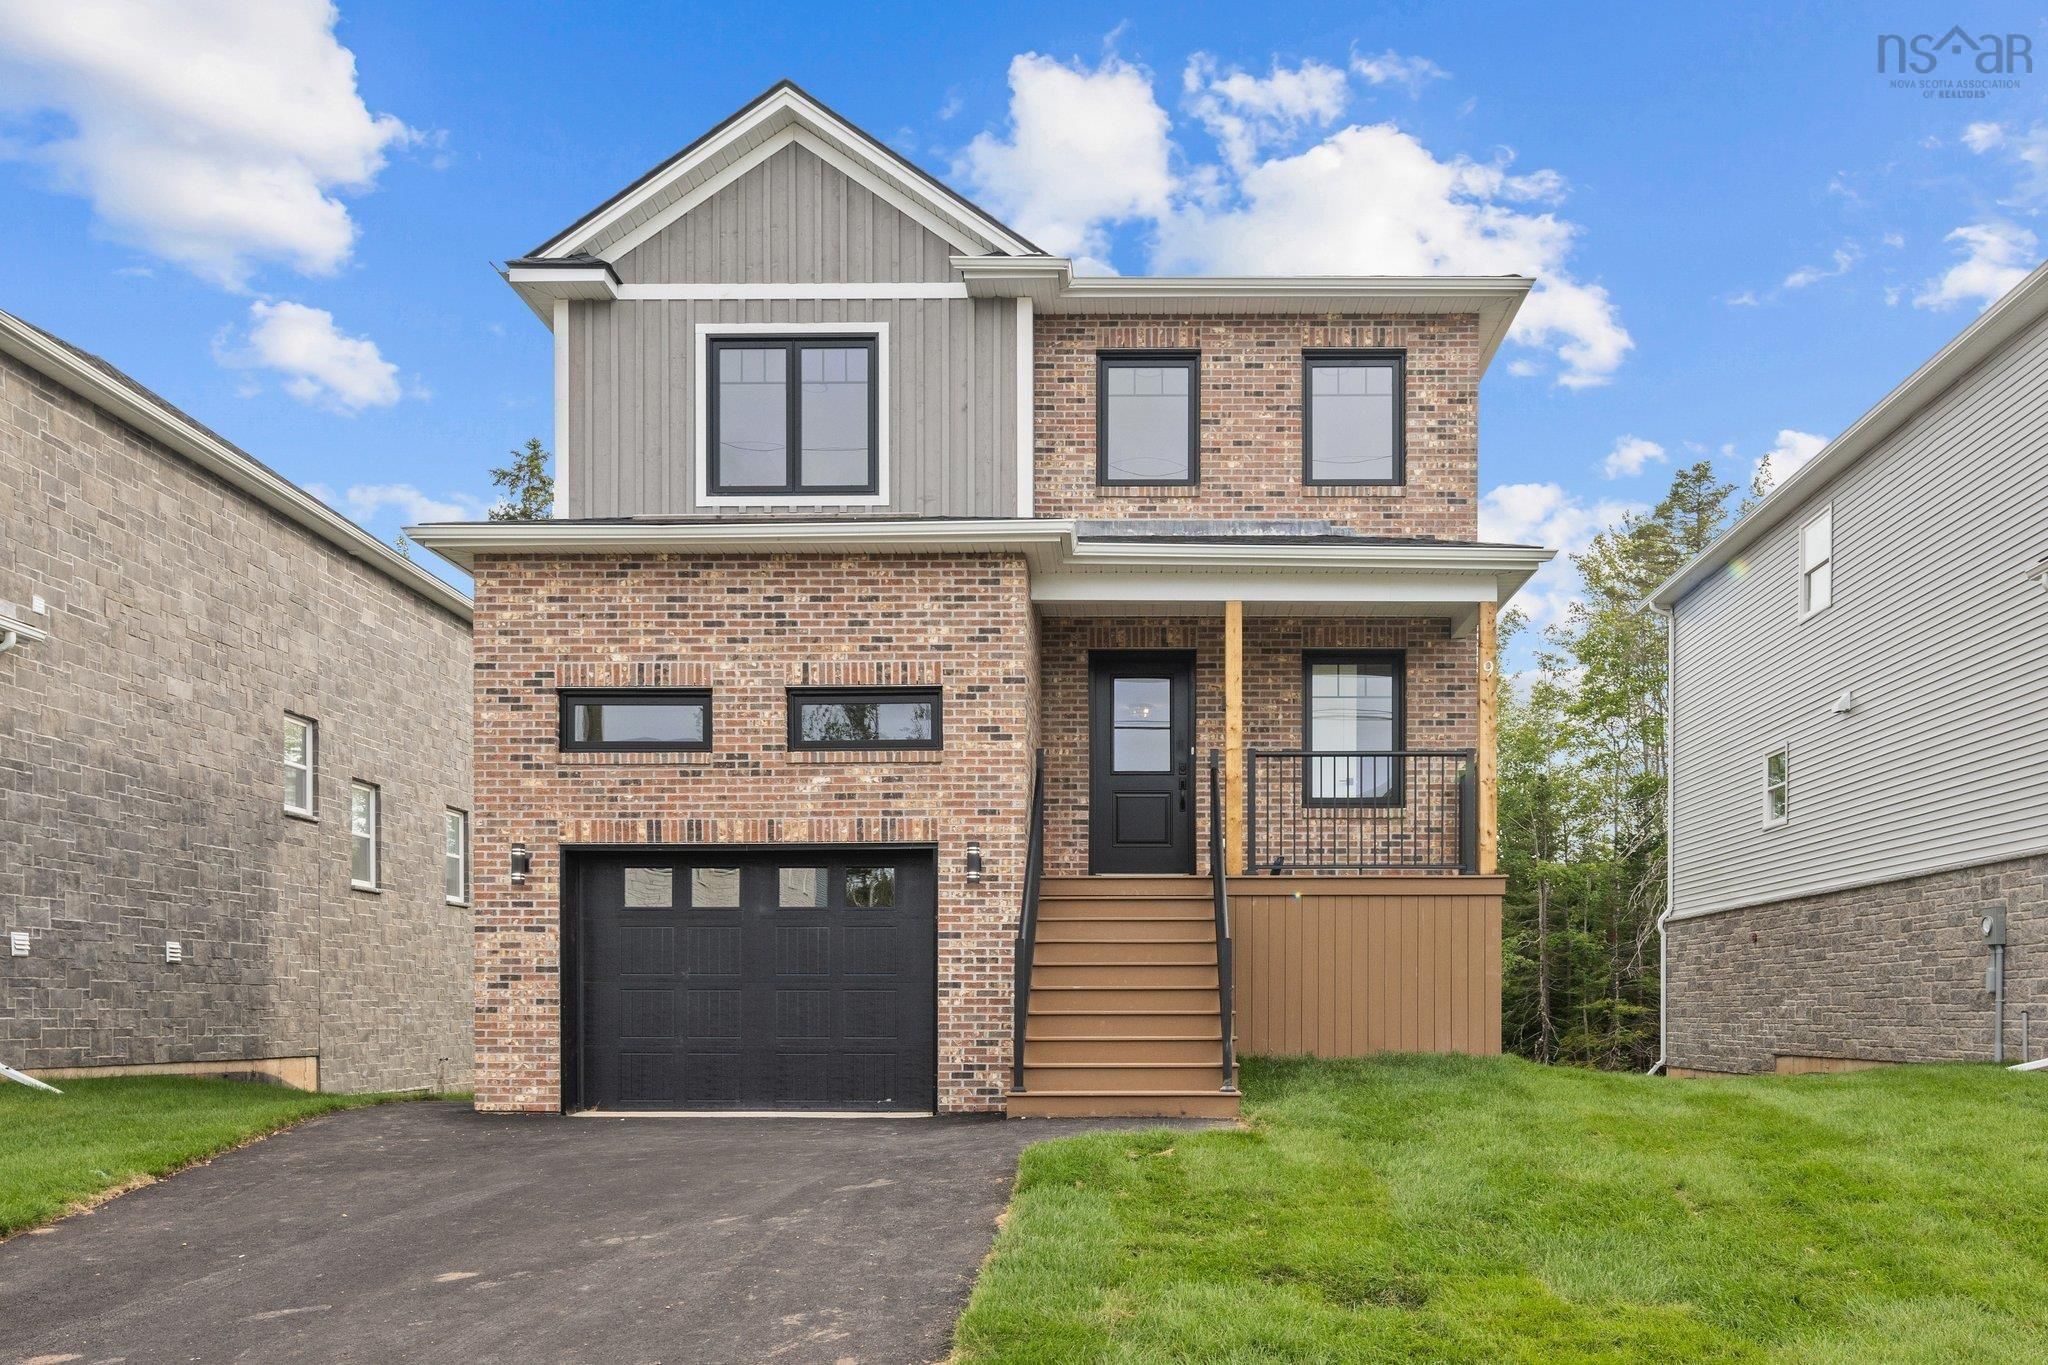 Open House. Open House on Sunday, September 17, 2023 2:00PM - 4:00PM
Join us this Sunday, September 17th, from 2:00 PM to 4:00 PM, at 9 Owdis Avenue in Kiln Creek to check out the new "Sterling" home by Stonewater Homes!   Get ready for an exclu